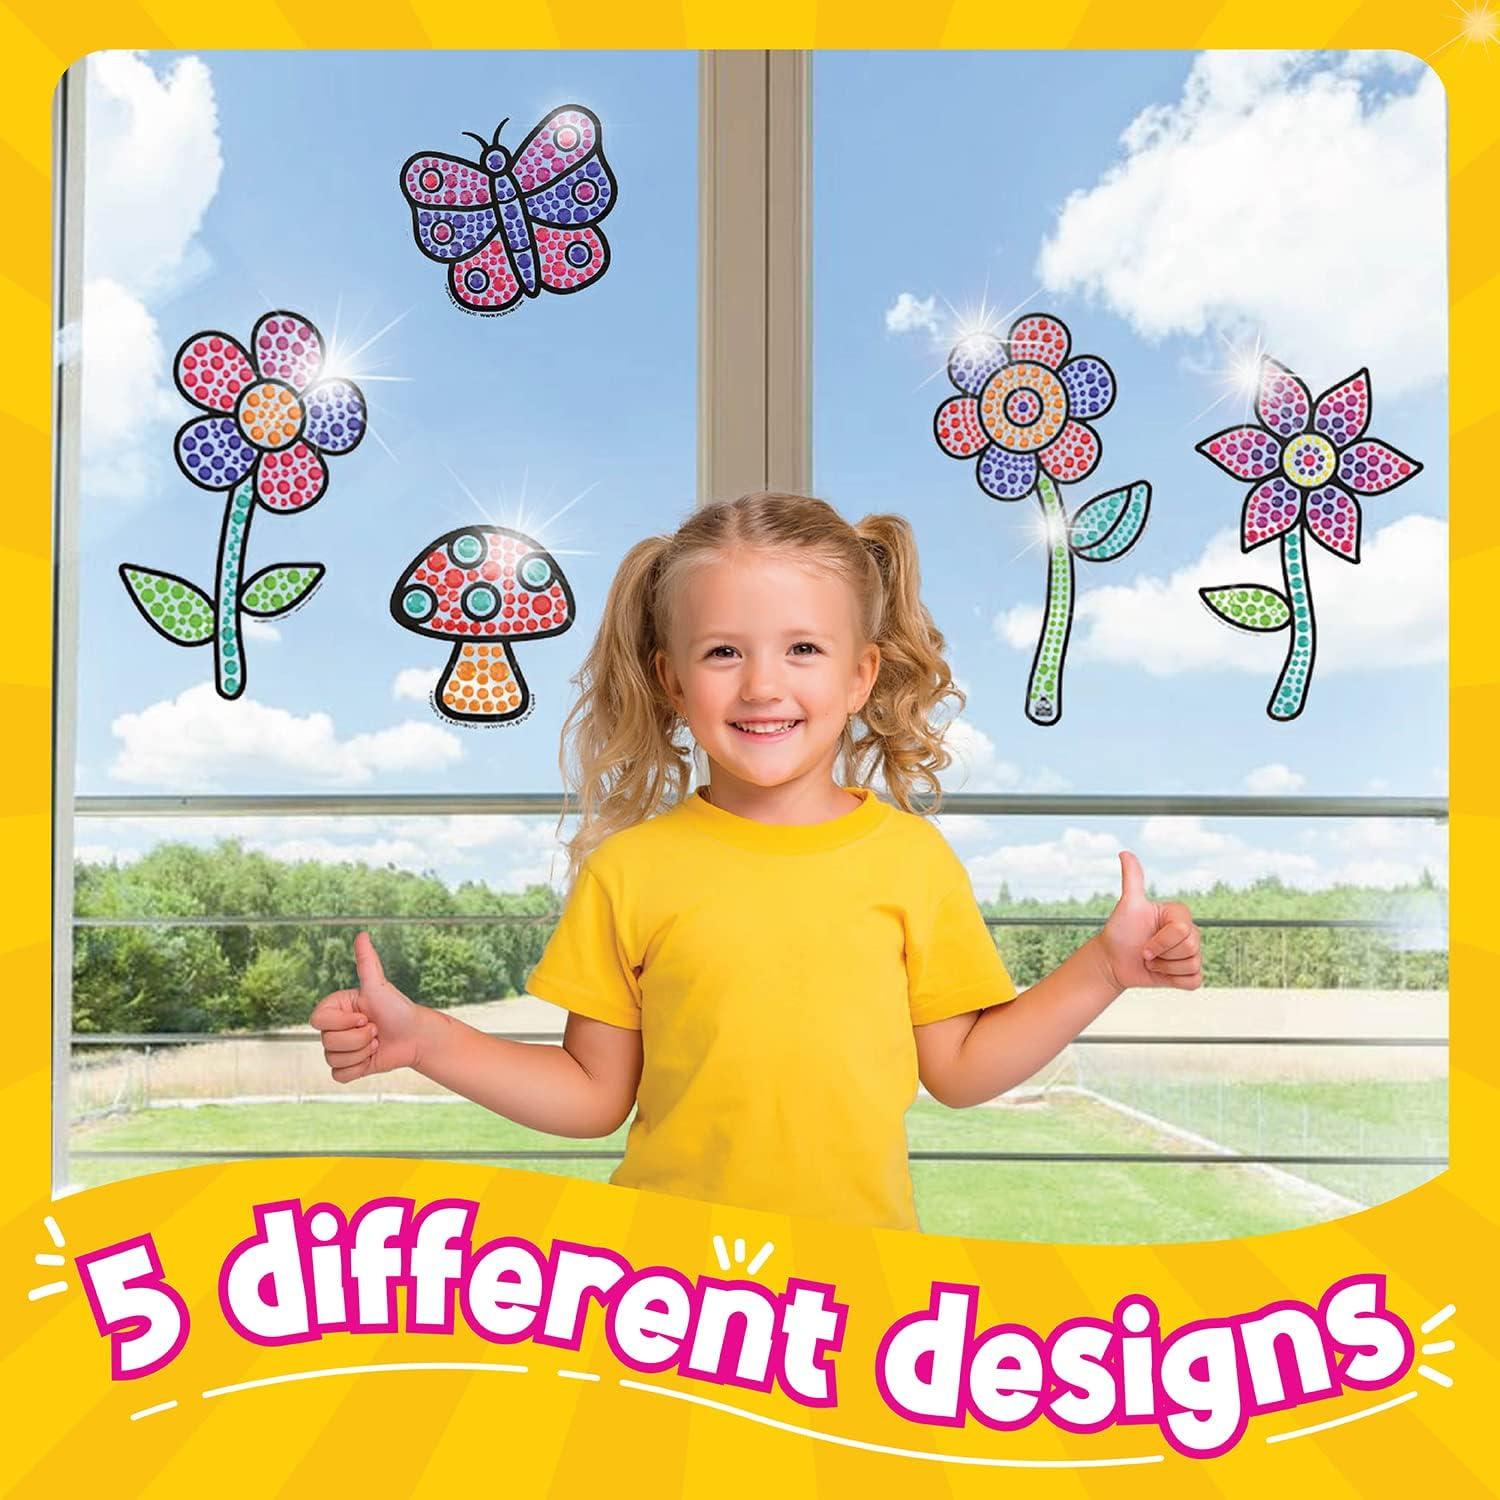  SUNGEMMERS Window Art Suncatcher Kits - Great Birthday Gift  Idea, 6 7 8 9 10 11 12 Year Old Girl - Fun Arts for Kids, Spring Crafts :  Toys & Games